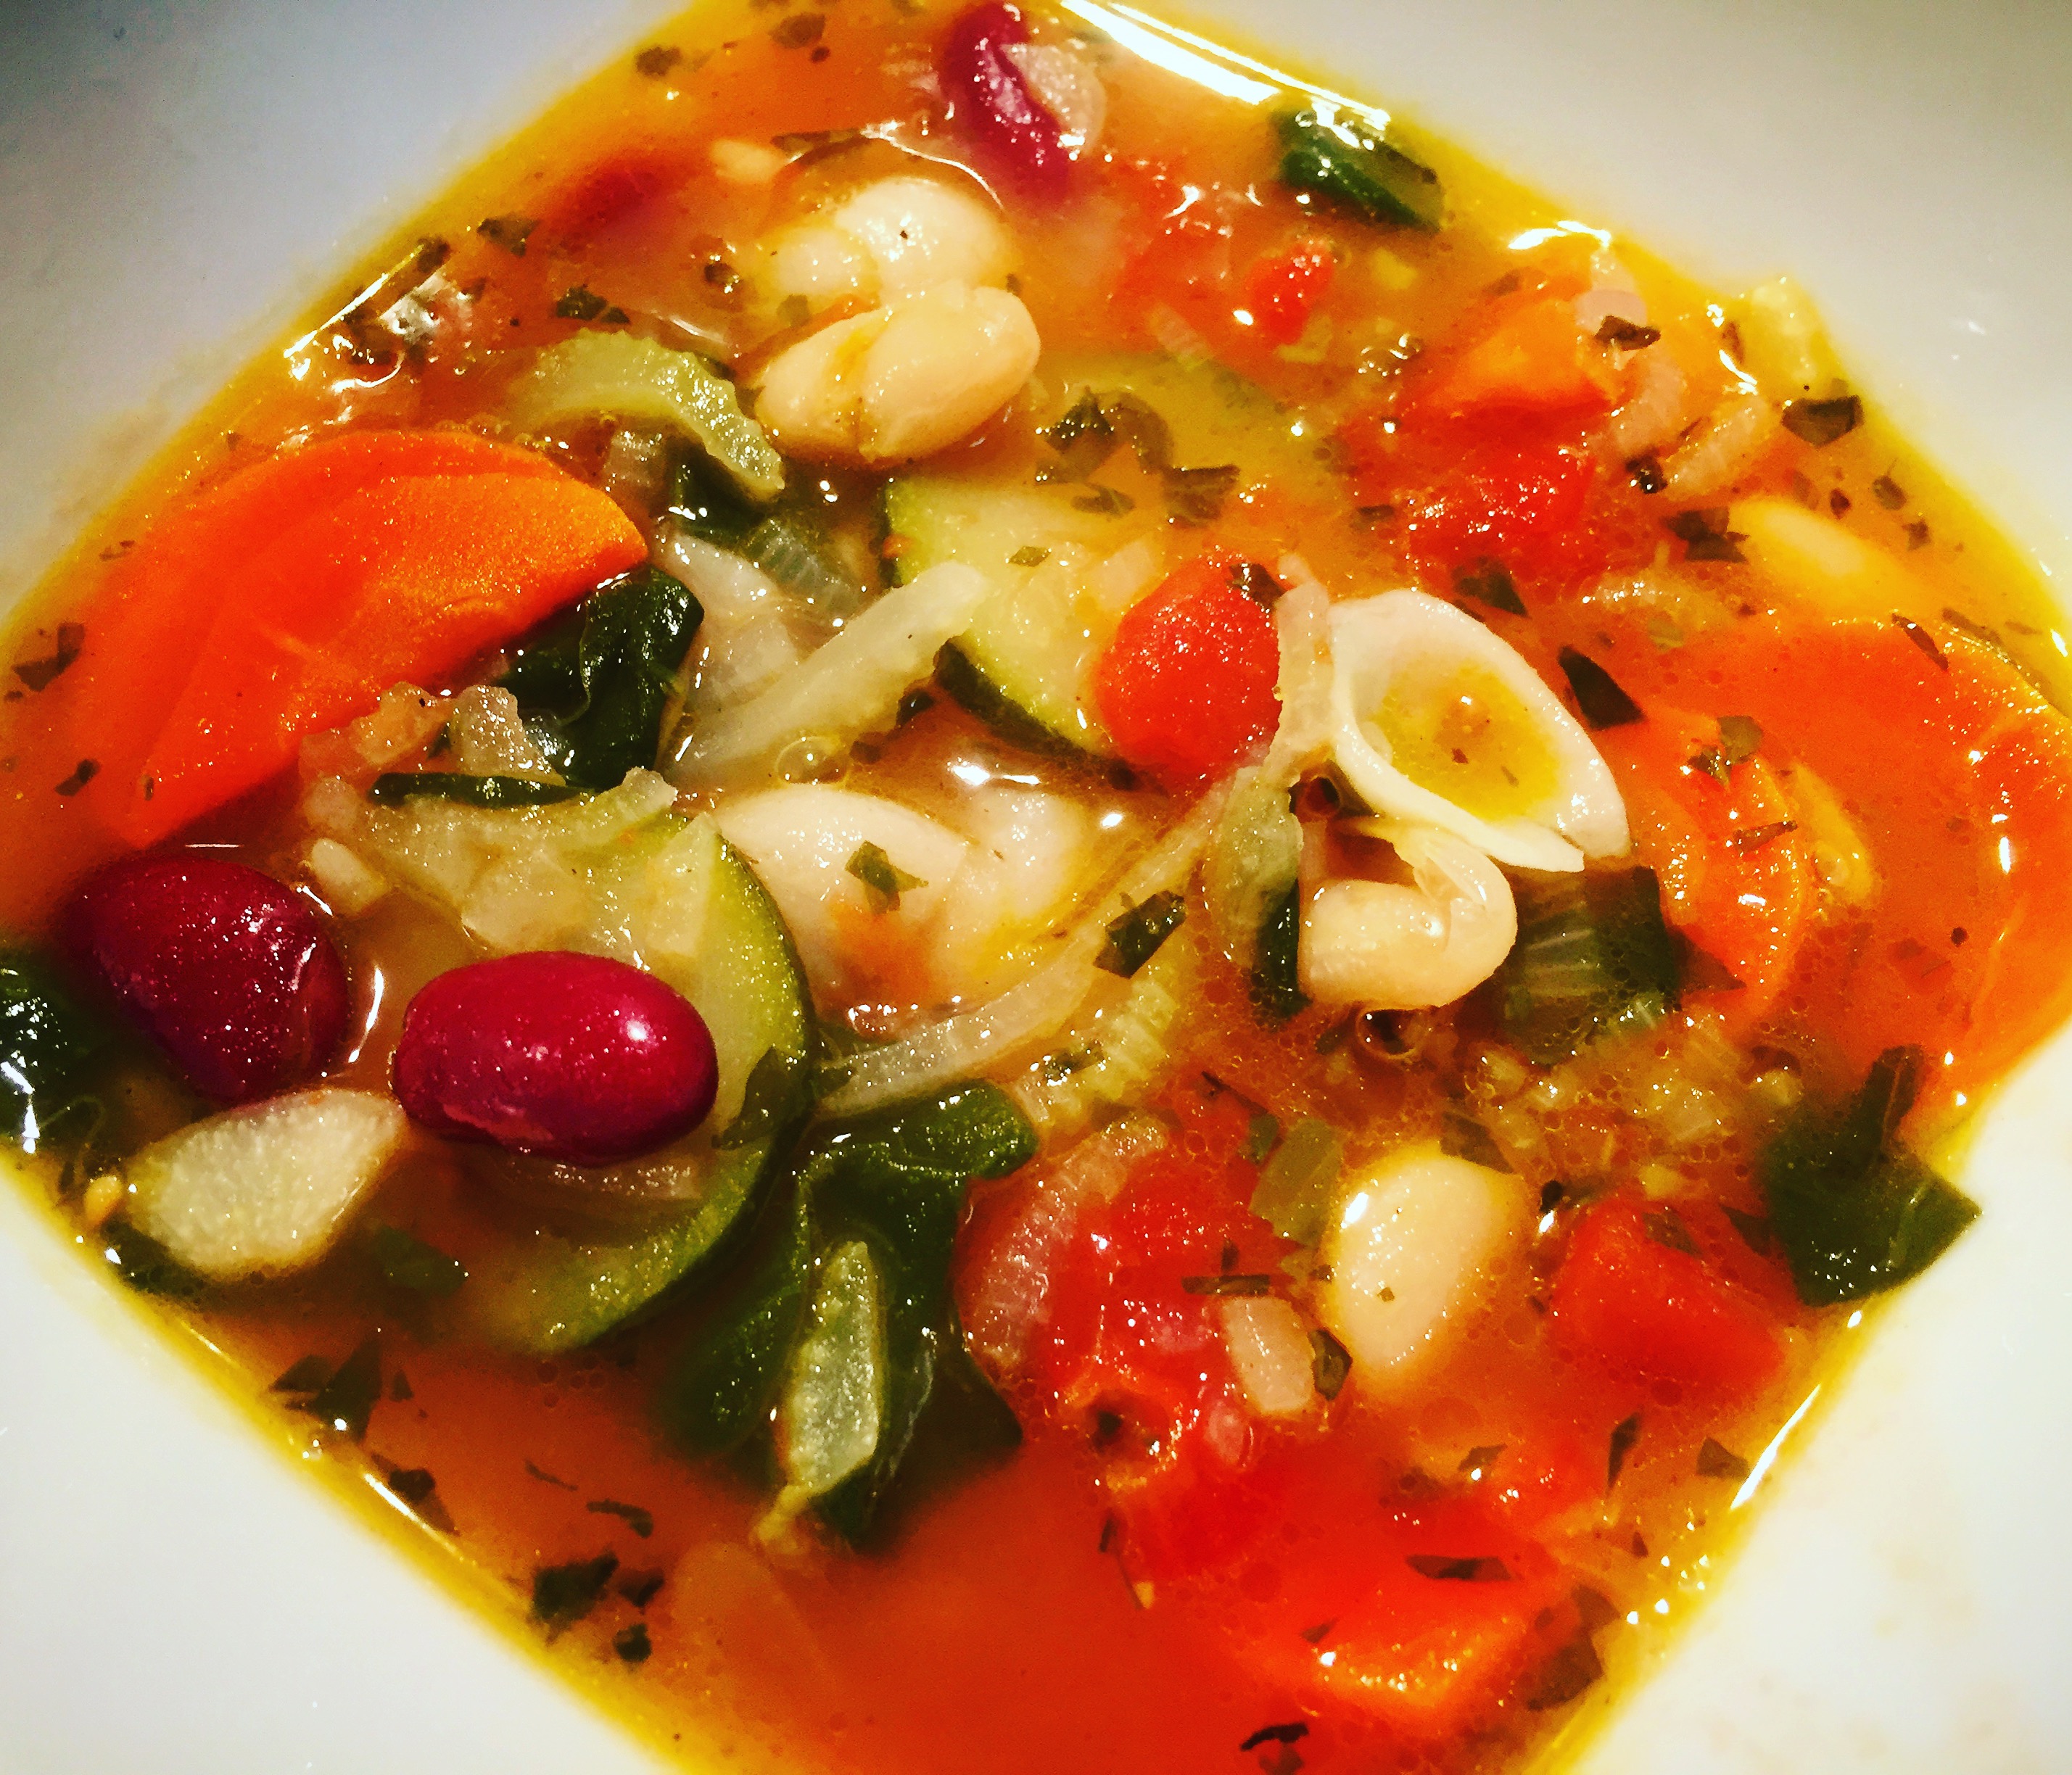 Delicious home made vegetarian minestrone soup with fresh herbs and garden vegetables